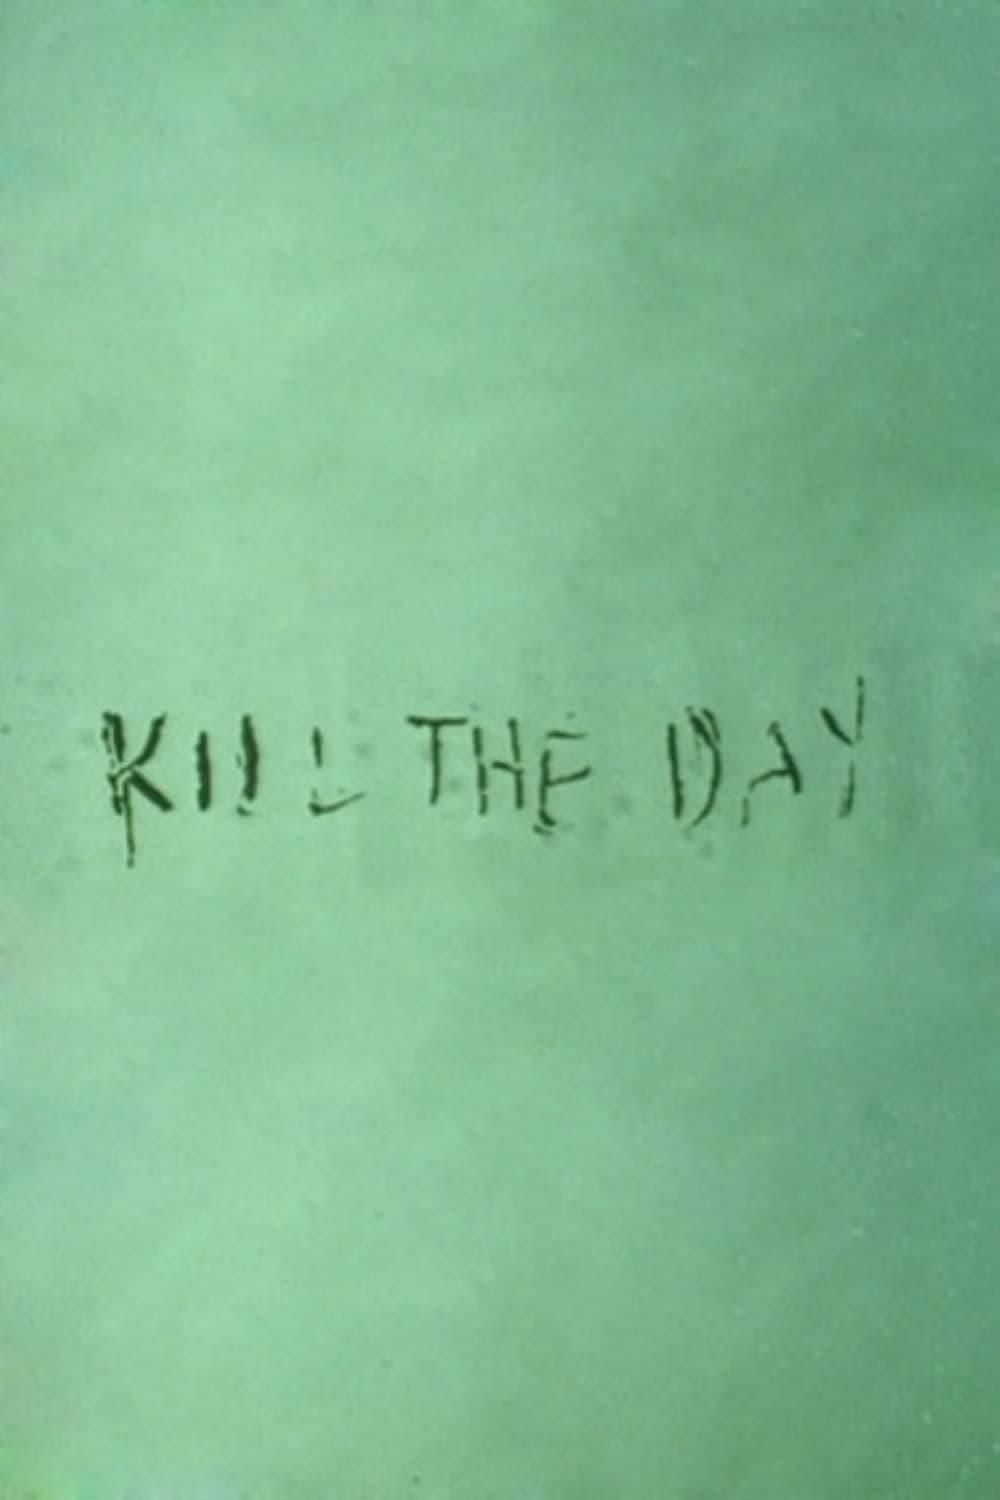 Kill the Day poster